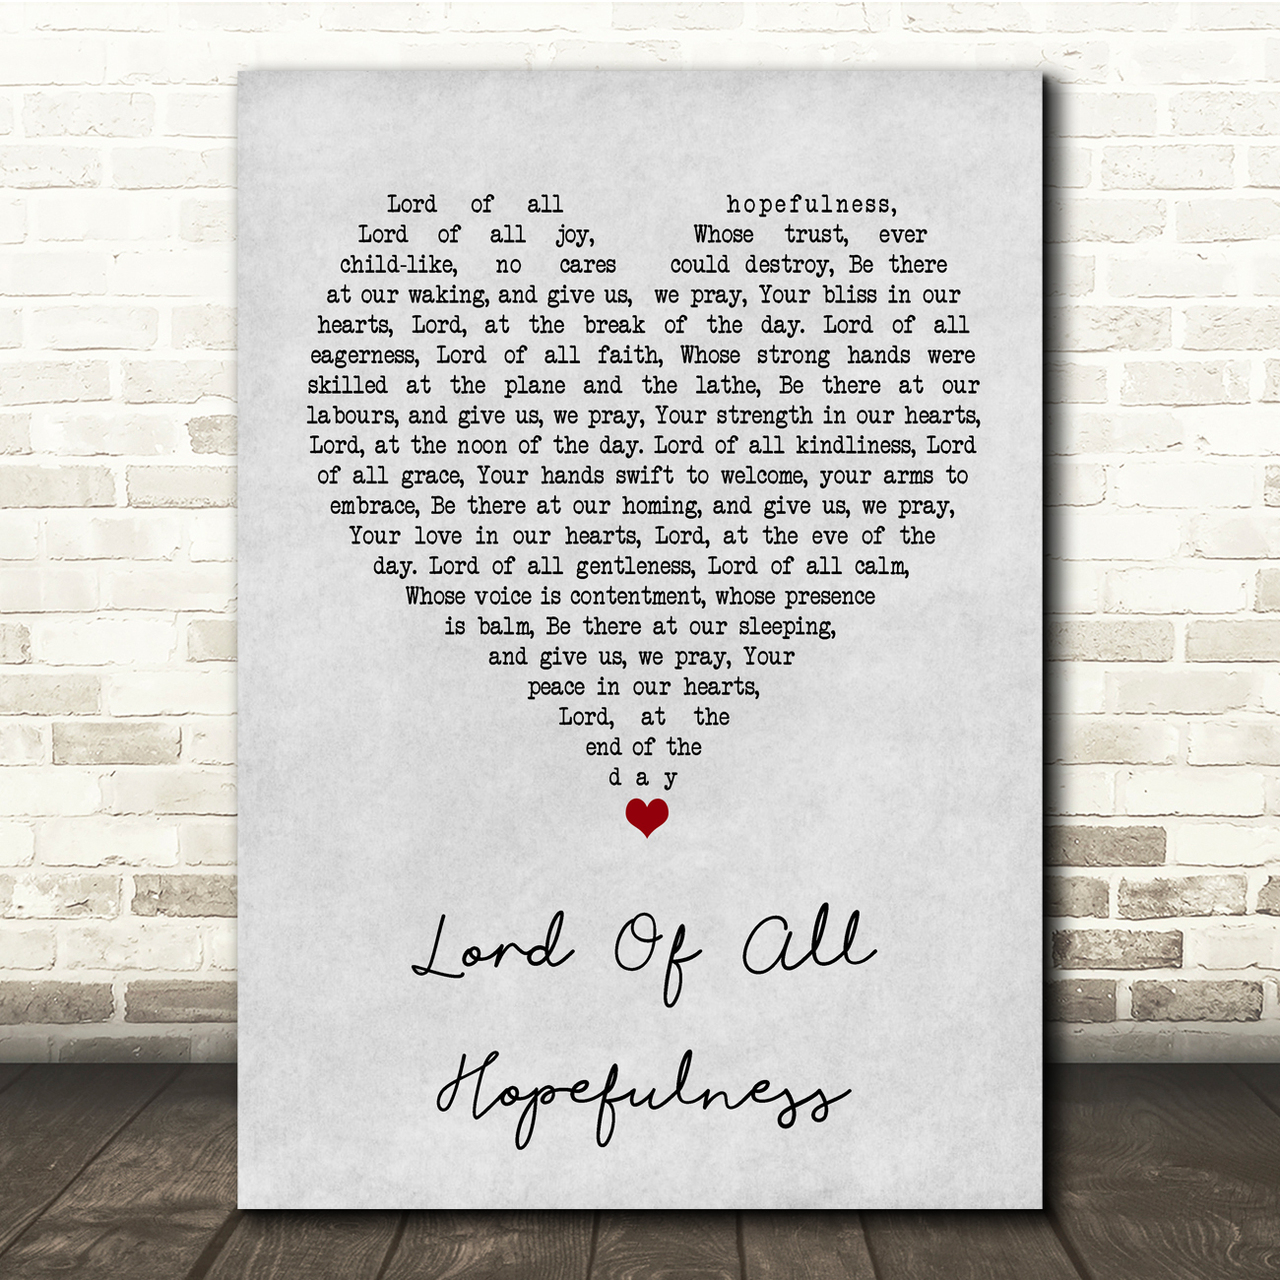 Lord of all hopefulness Jan Struther Grey Heart Song Lyric Music Print